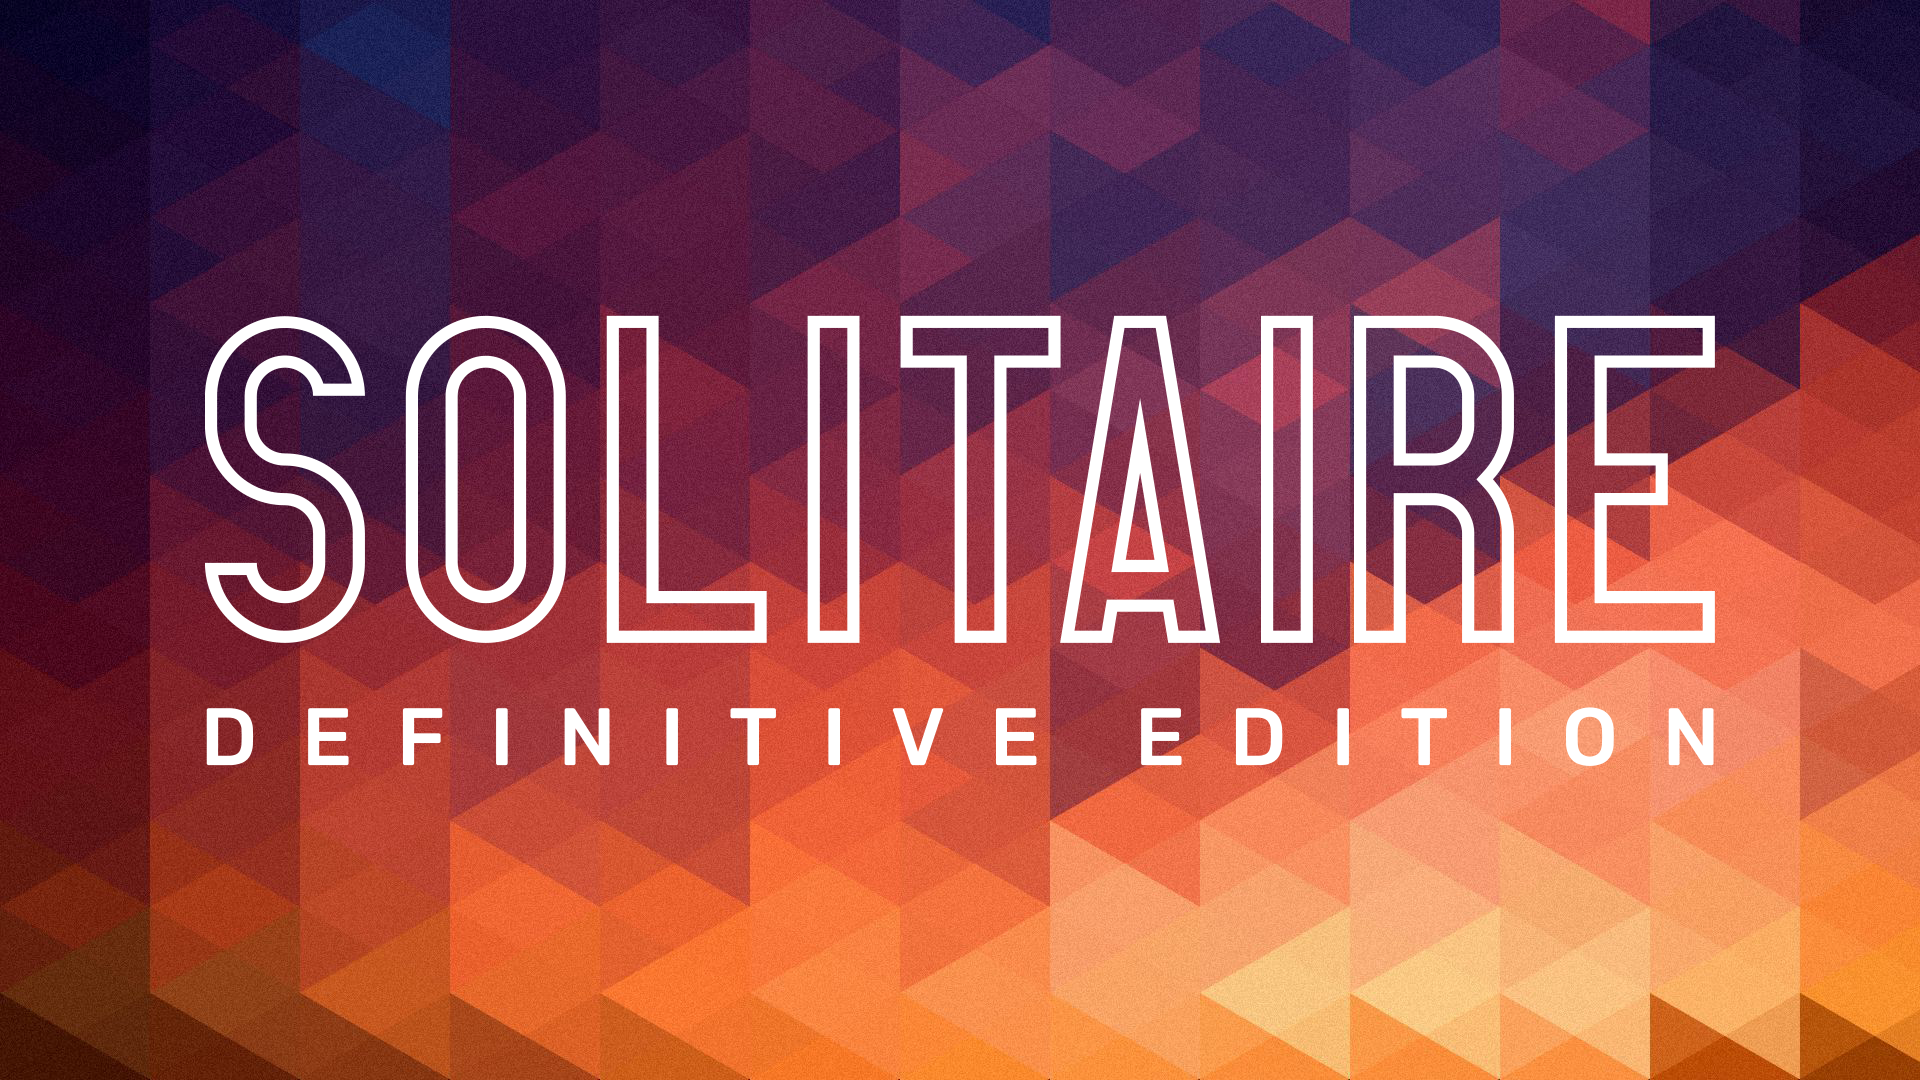 Solitaire Definitive Edition Game Image